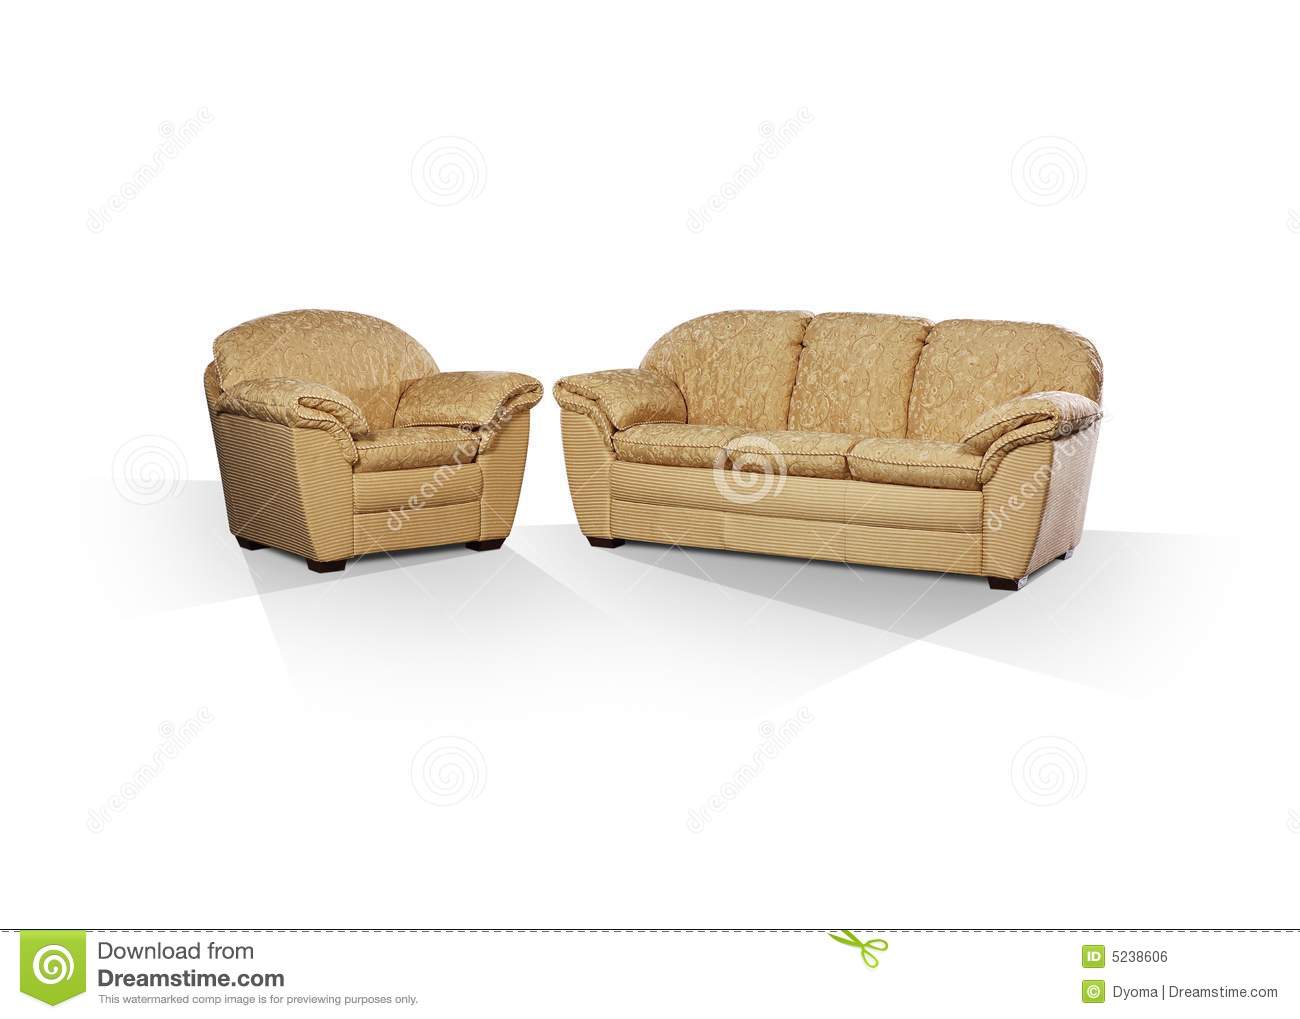 Sofa And Arm Chair In The Tissue Upholstering On A White Background